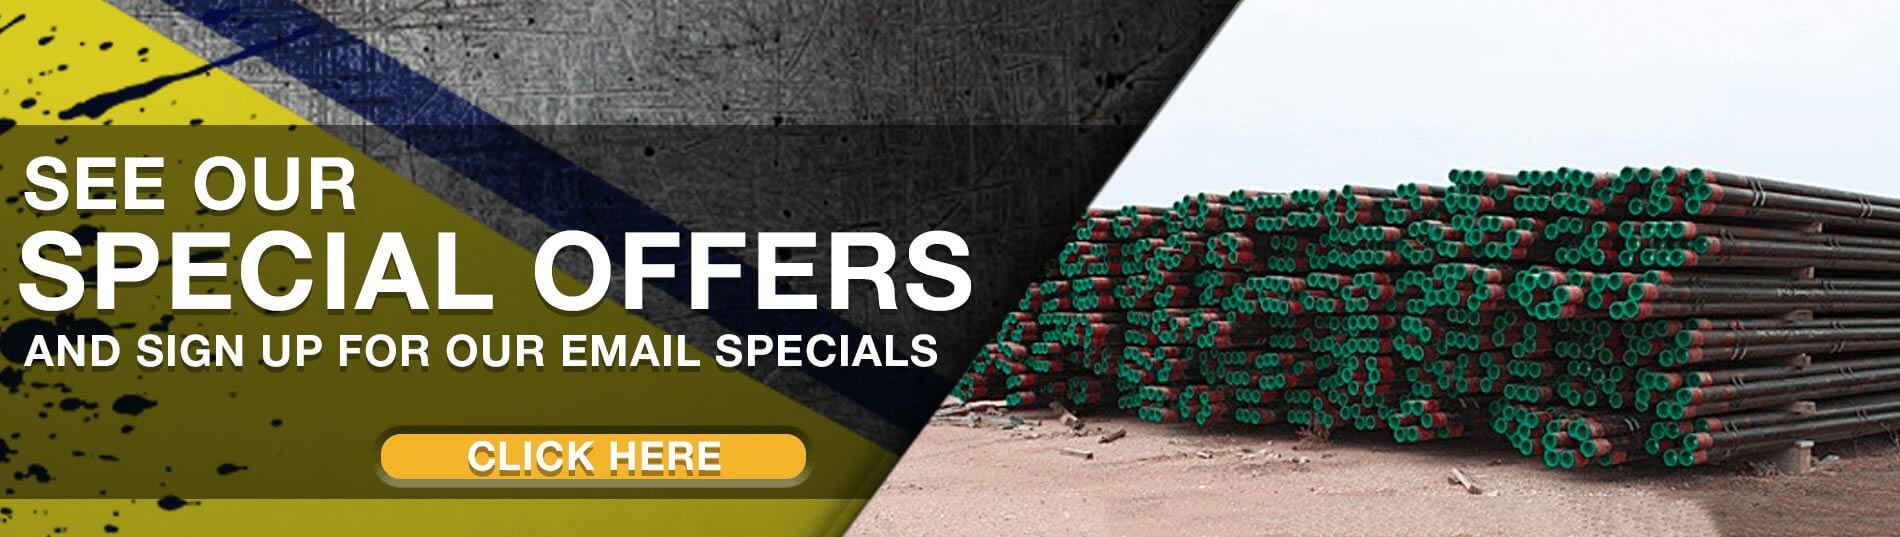 special offers_no sat